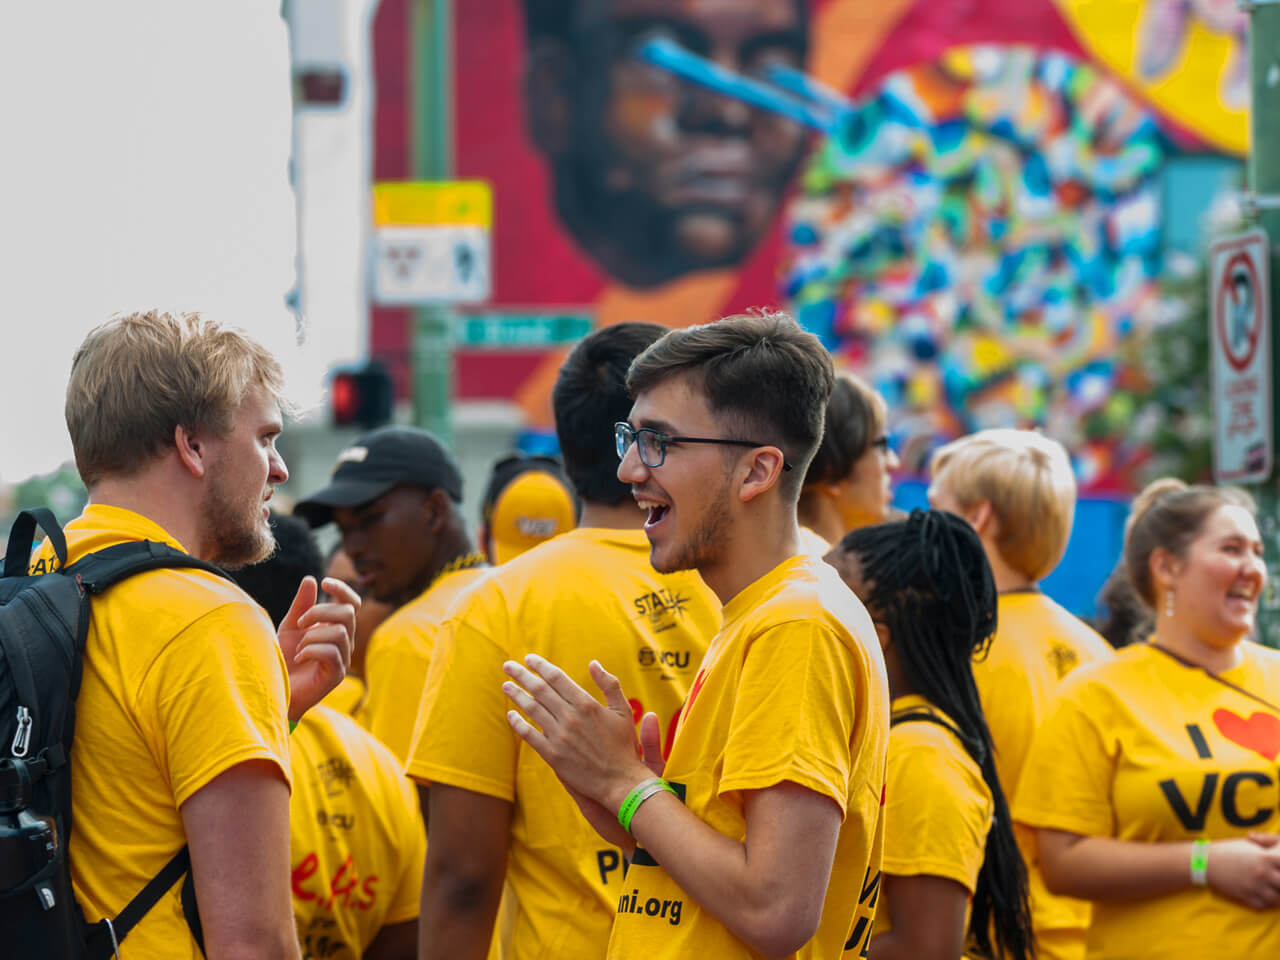 Students in vcu gold shirts outdoors at an event